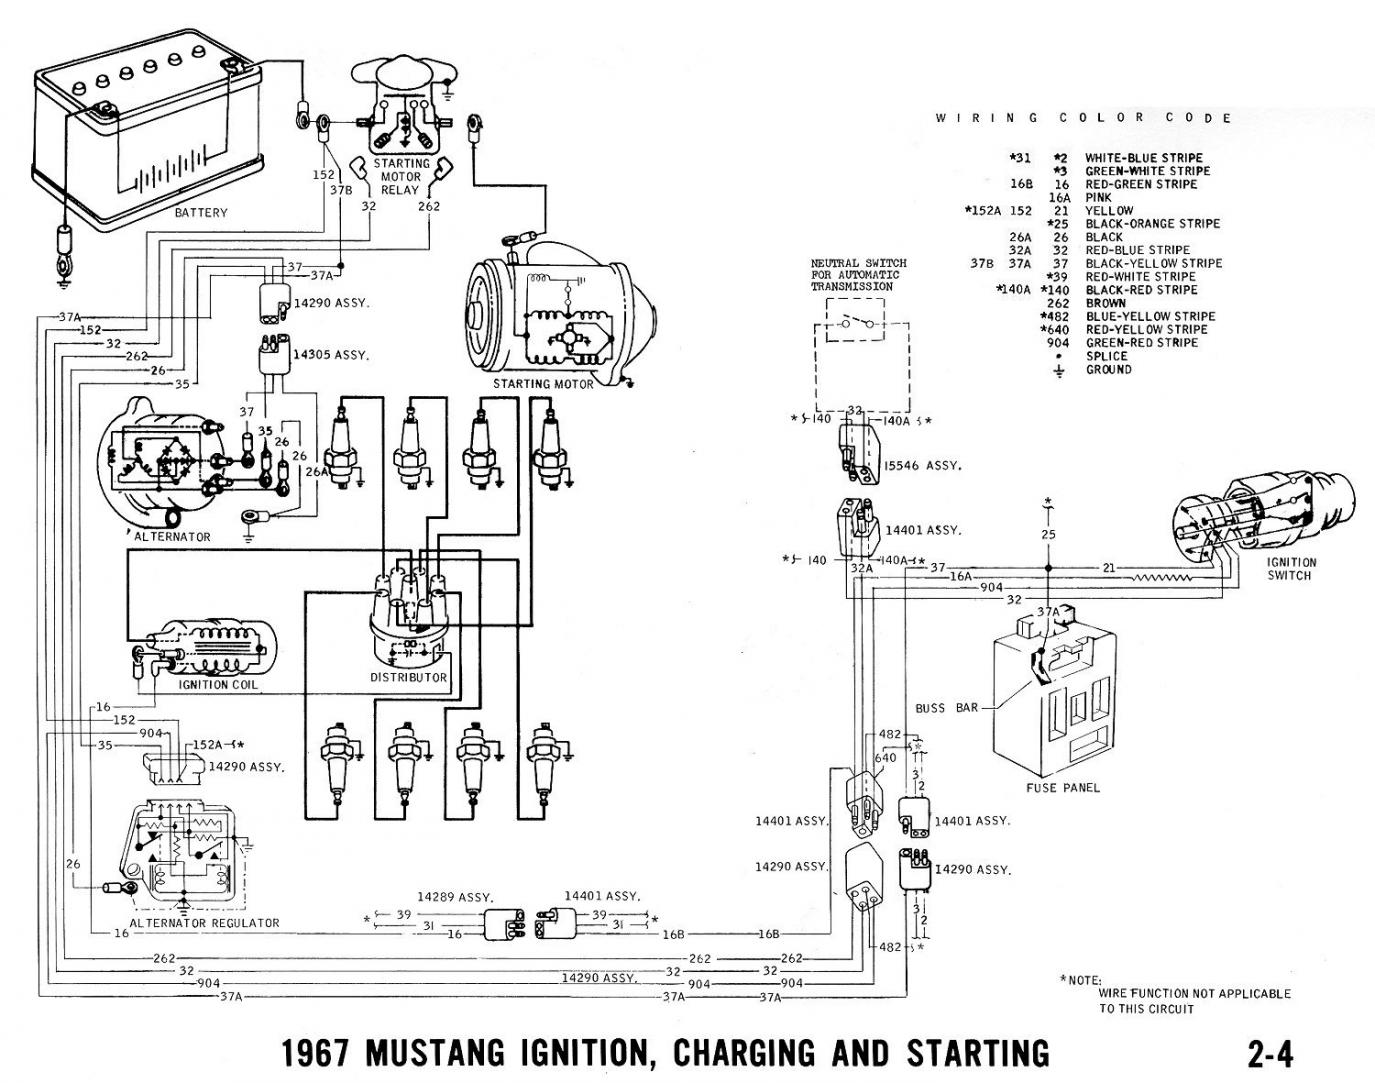 1965 Mustang Ignition Coil Wiring Diagram from www.stangnet.com